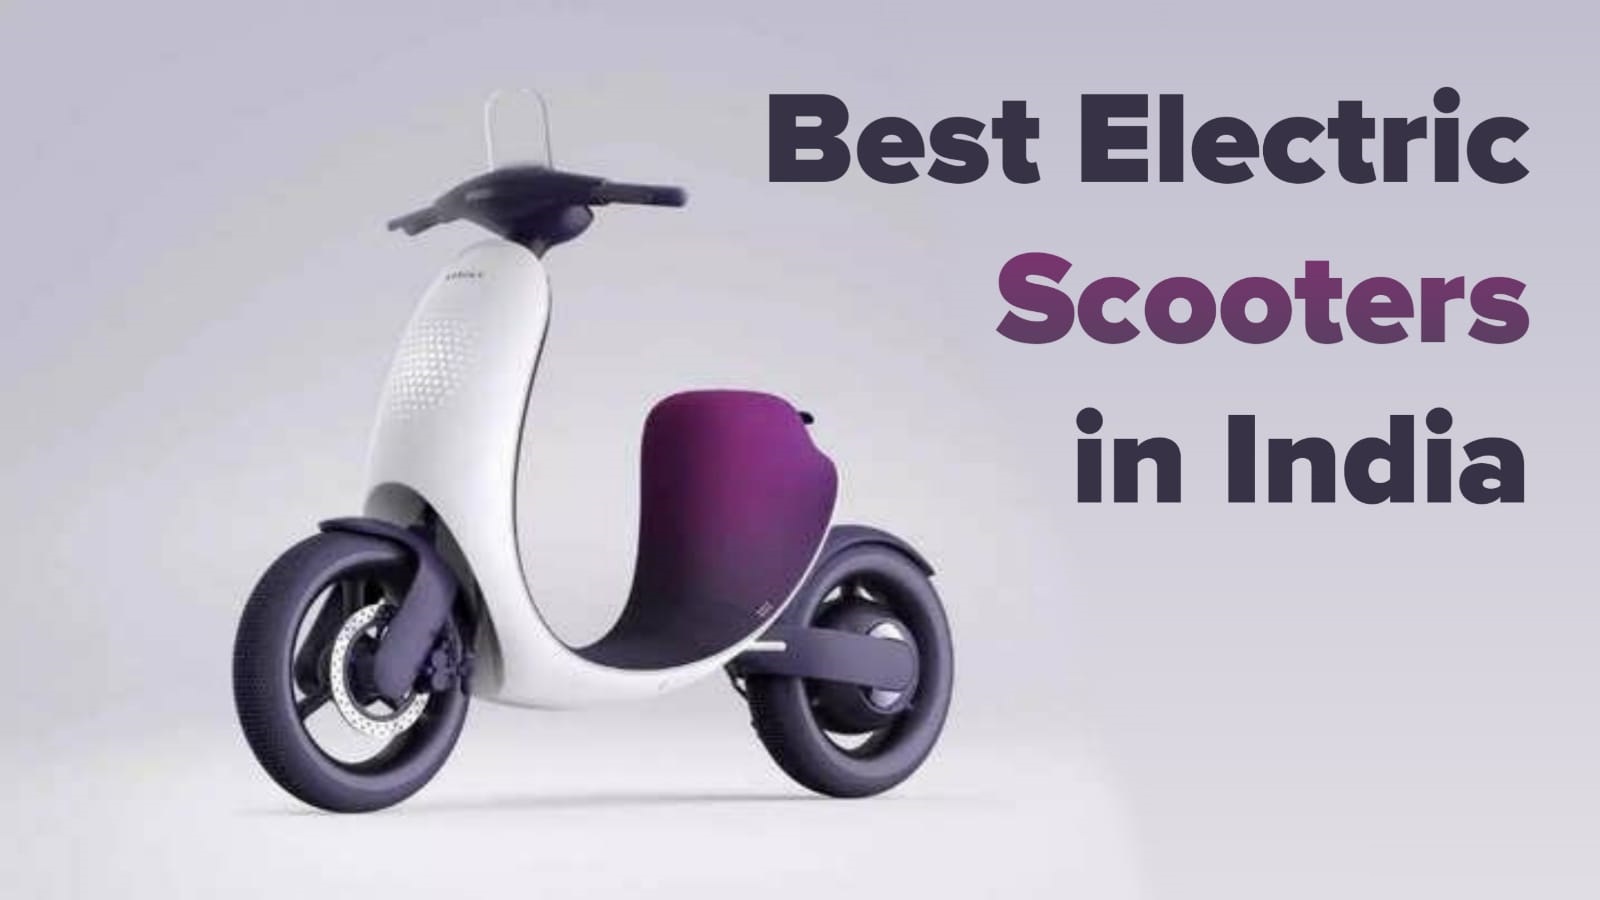 Top 5 Best Electric Scooters